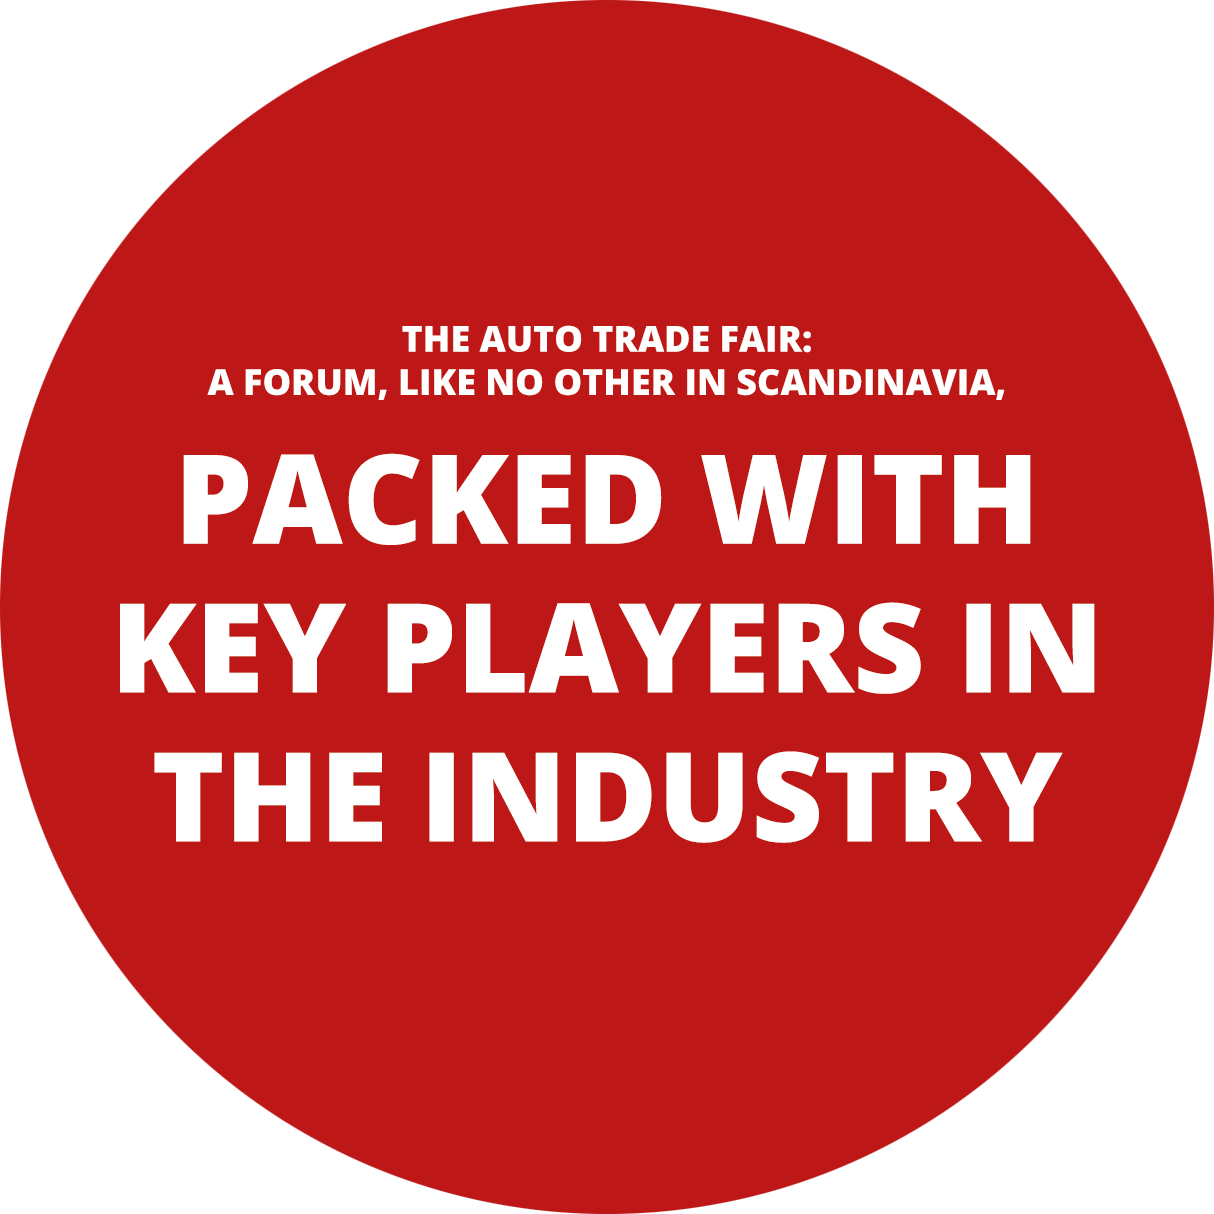 The Auto Trade Fair: A forum, like No other in Scandinavia, packed with key players in the industry